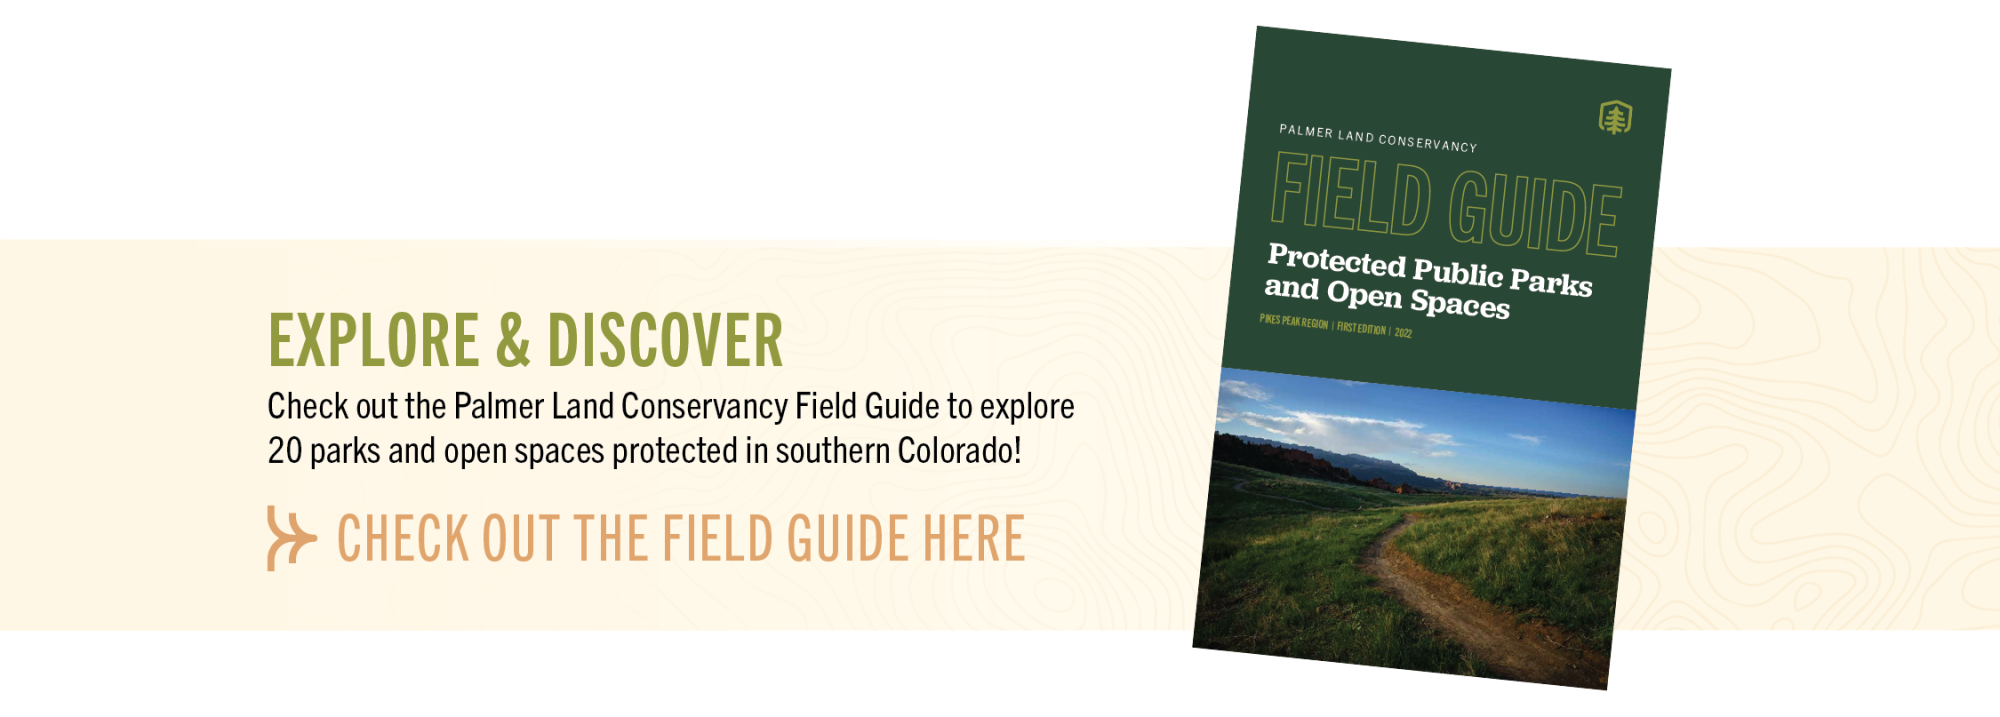 Image of the Field Guide with text reading "Explore and Discover, Check out the Palmer Land Conservancy Field Guide to explore 20  parks and open spaces protected in southern Colorado!"